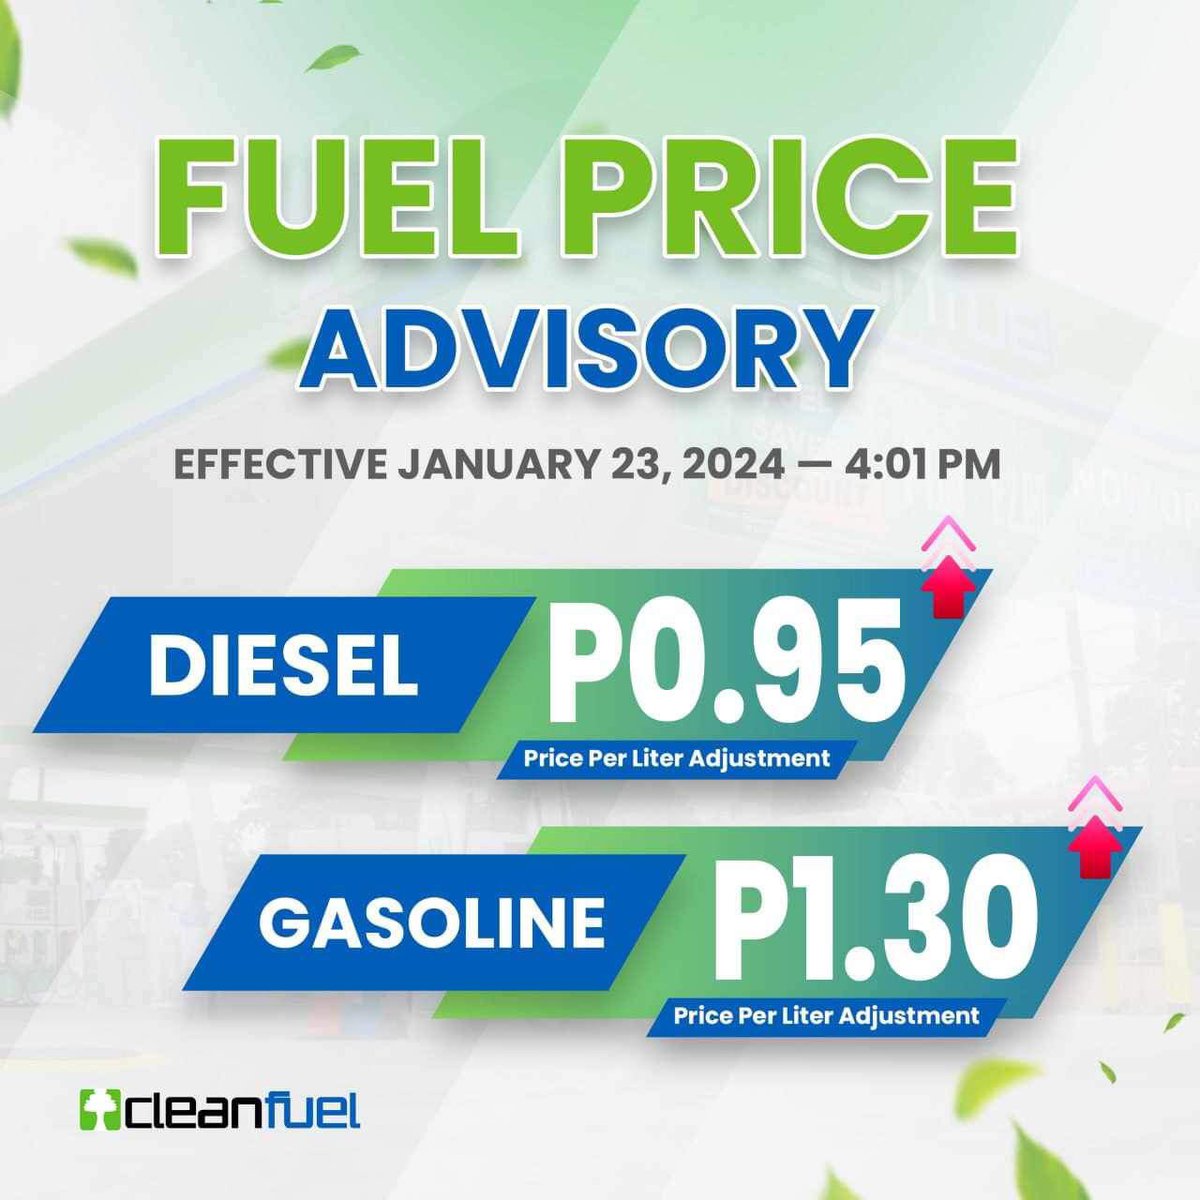 #CleanfuelPH will implement price adjustment, effective Tuesday, January 23, 2024 at 4:01pm. 

⬆️ Gasoline + 1.30/L (Increase)
⬆️ Diesel + 0.95/L (Increase) 

Stay safe and healthy!